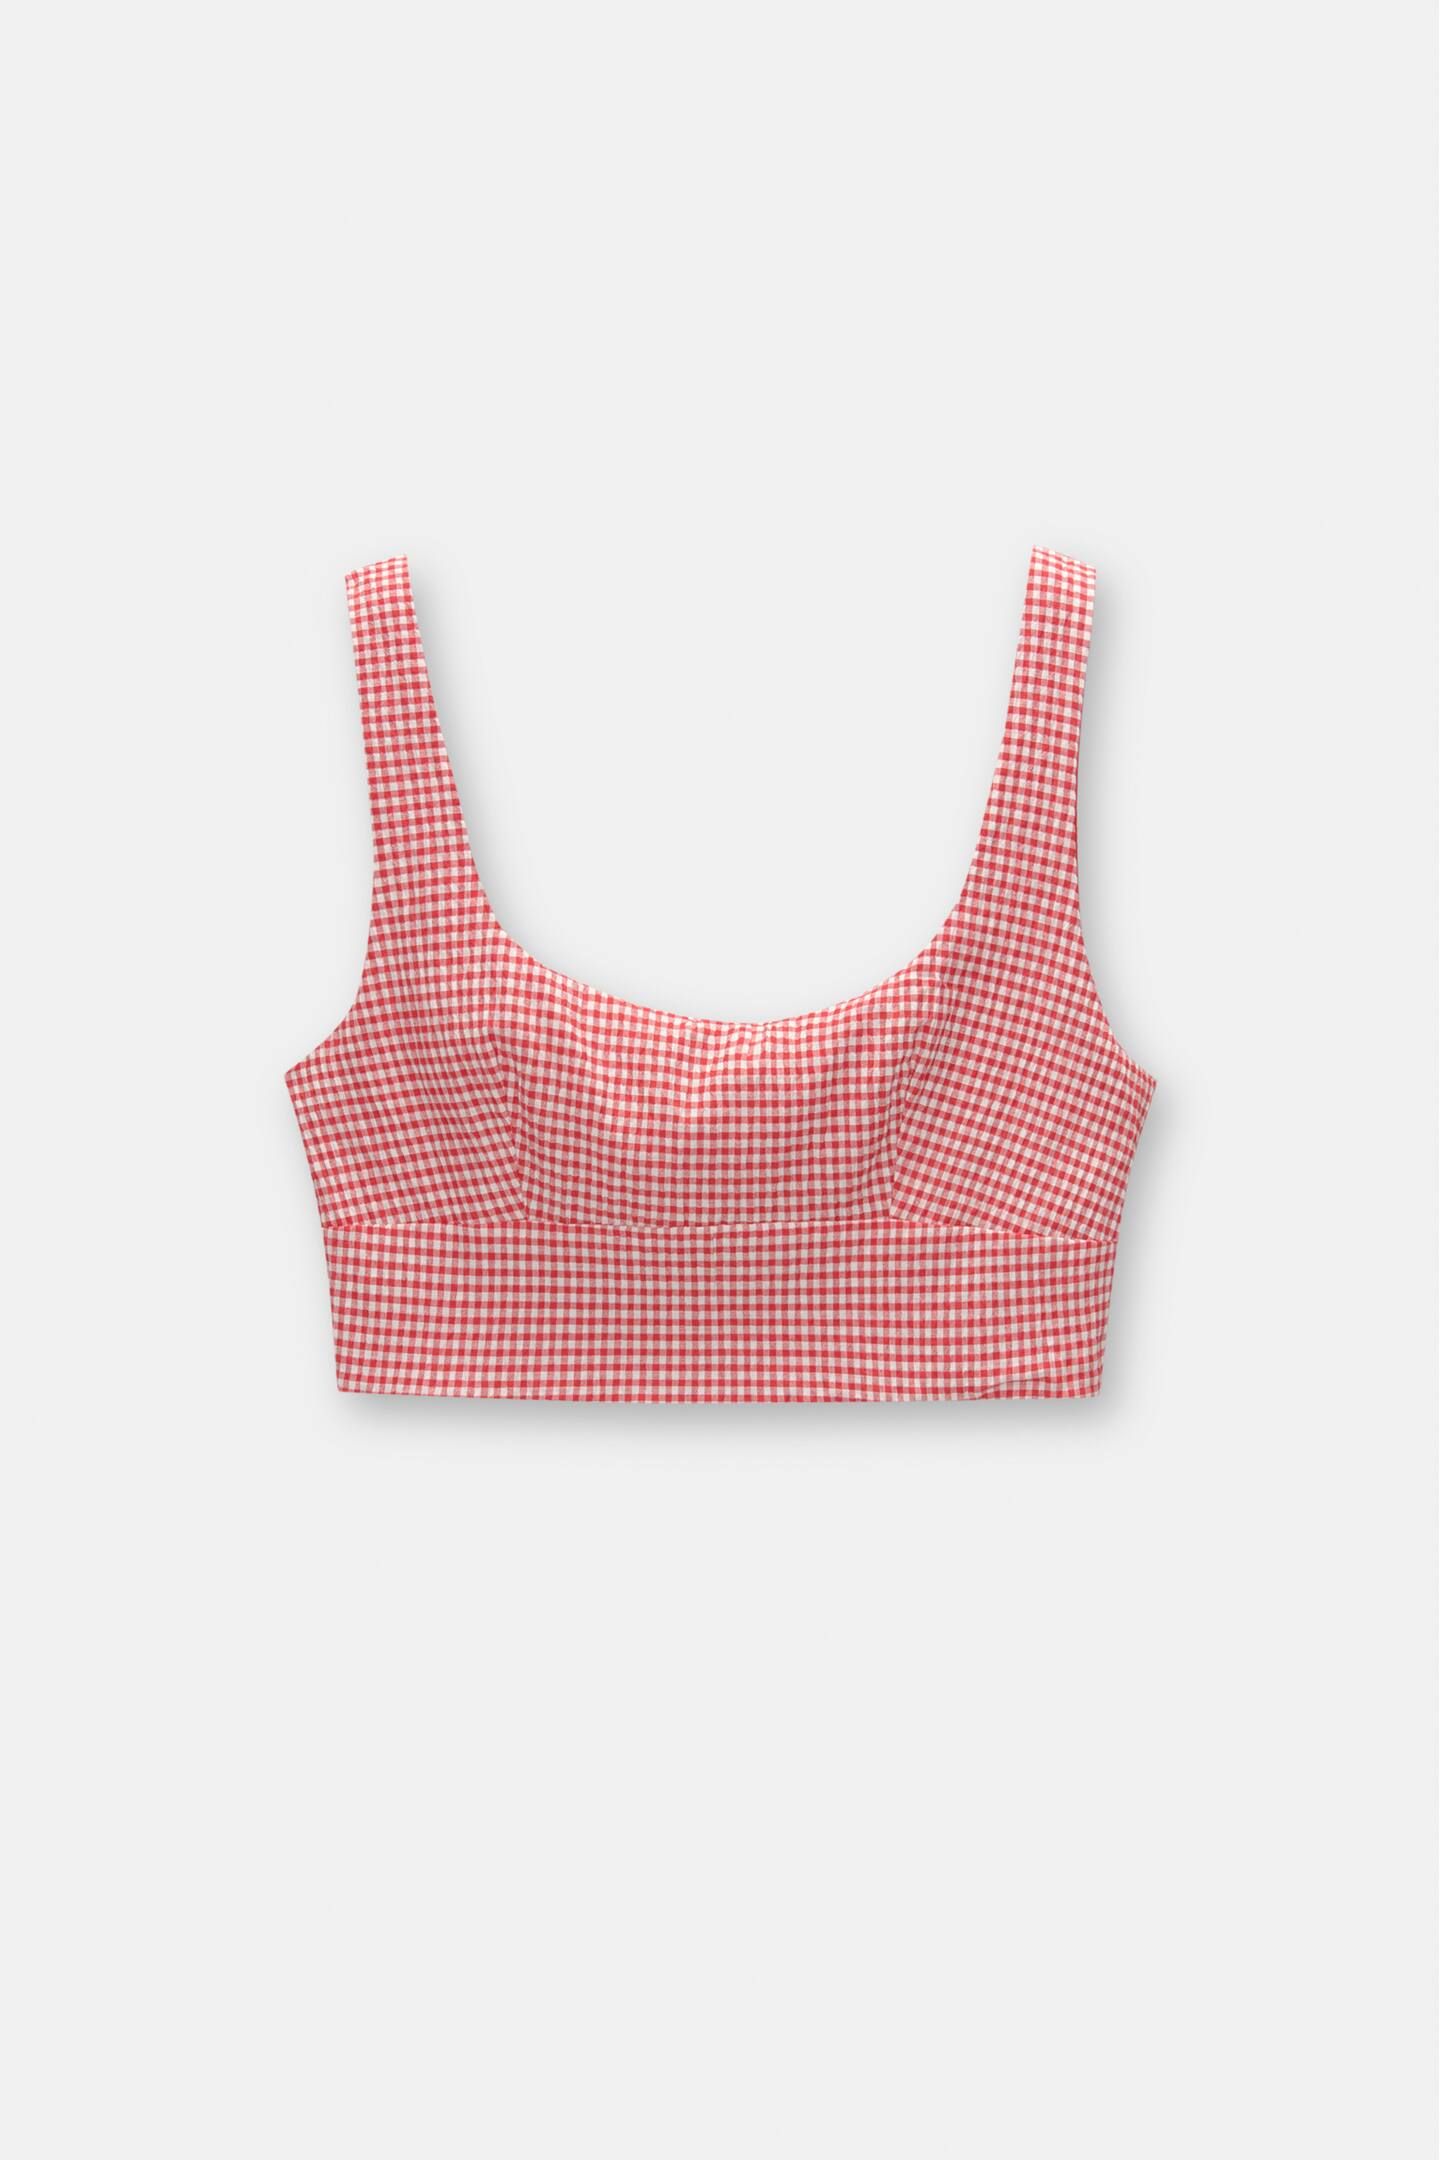 Gingham crop top | PULL and BEAR UK